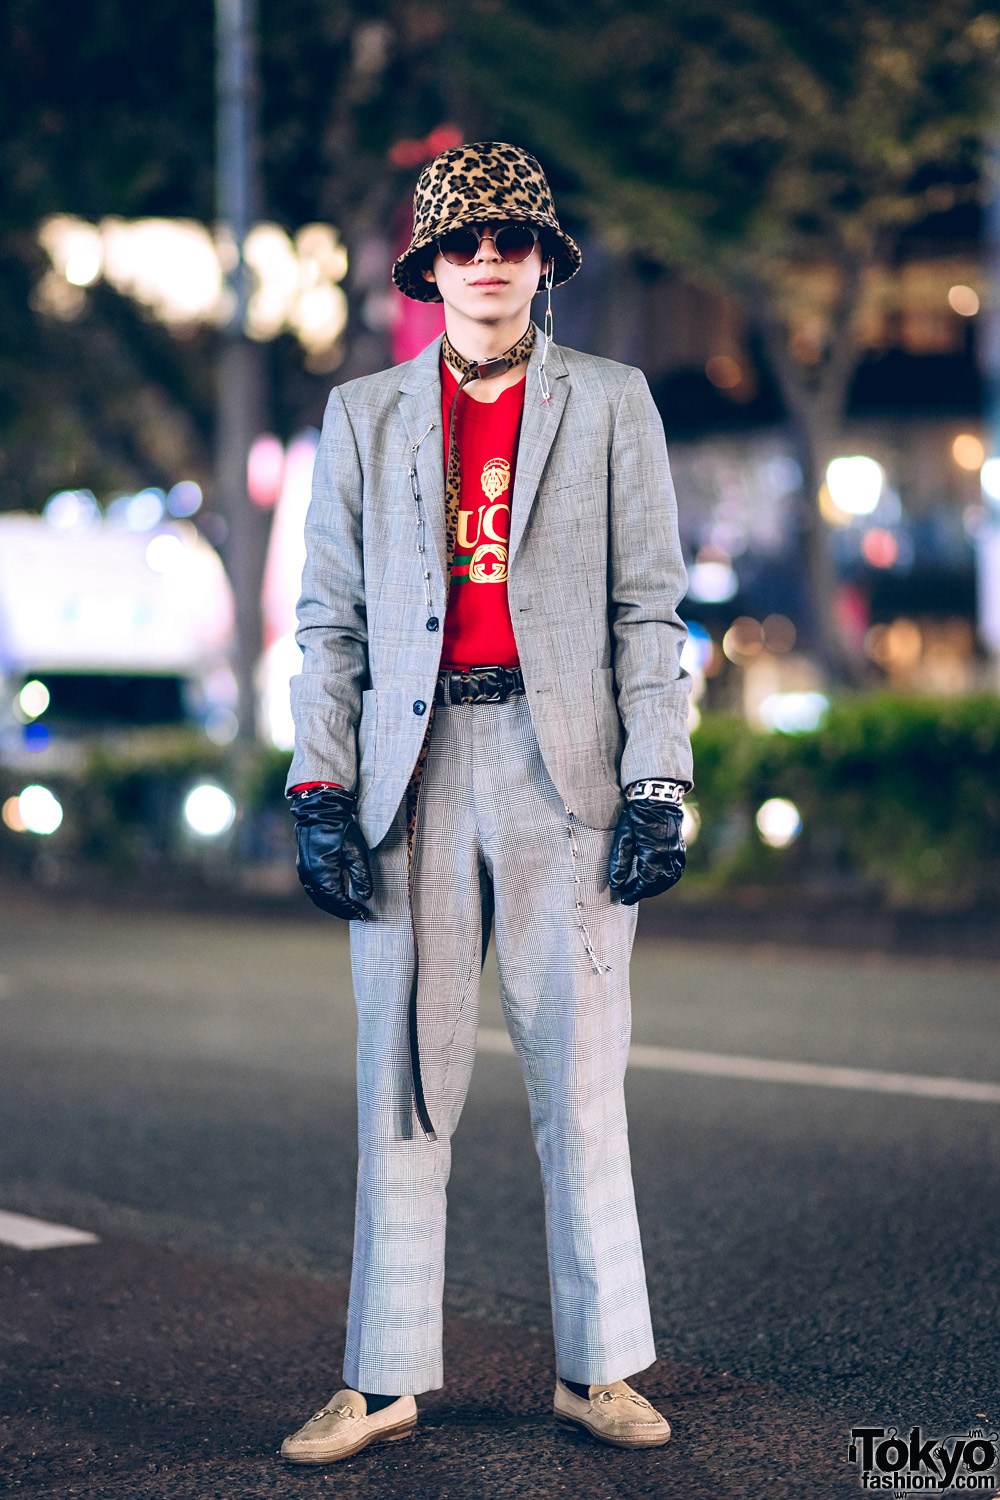 Tokyo Streetwear Style w/ Leopard Print Hat, Houndstooth Suit, Leather ...